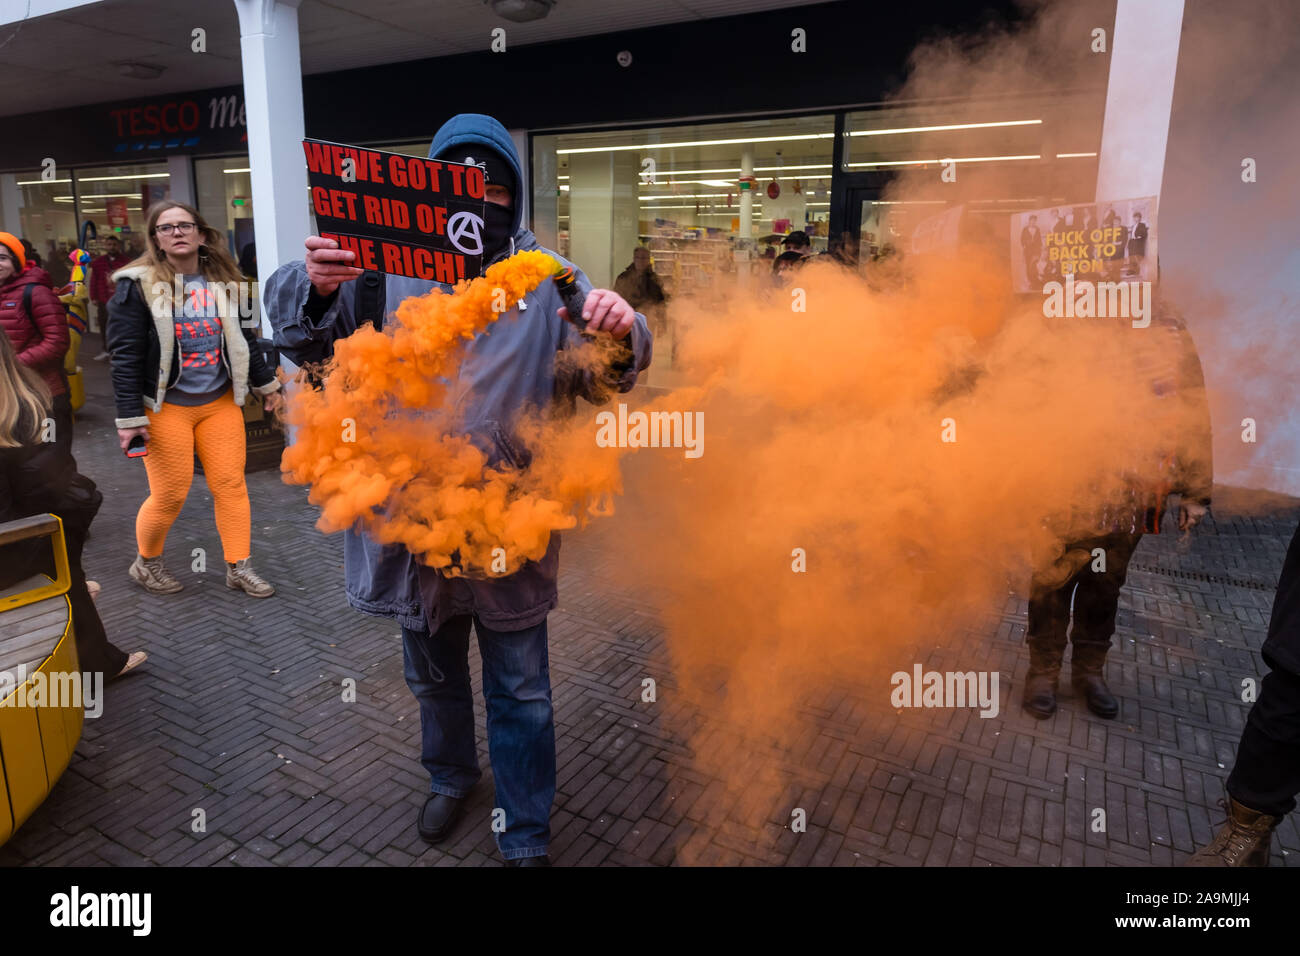 London, UK. 16th November 2019. Anarchists join the protest saying 'Why Vote? Revolt!' and set off an orange flare  as FCKBoris in orange knitted hats walk through Uxbridge shopping centre handing out fliers urging everyone to register and vote against Boris Johnson and kick him out for his racist, elitist politics. They marched with a sound system on a bus to Brunel University to persuade students. Johnson had a majority of just over 5 thousand in 2017 and Labour candidate Ali Milani has strong hopes of beating him and the other 10 candidates. Peter Marshall/Alamy Live News Stock Photo